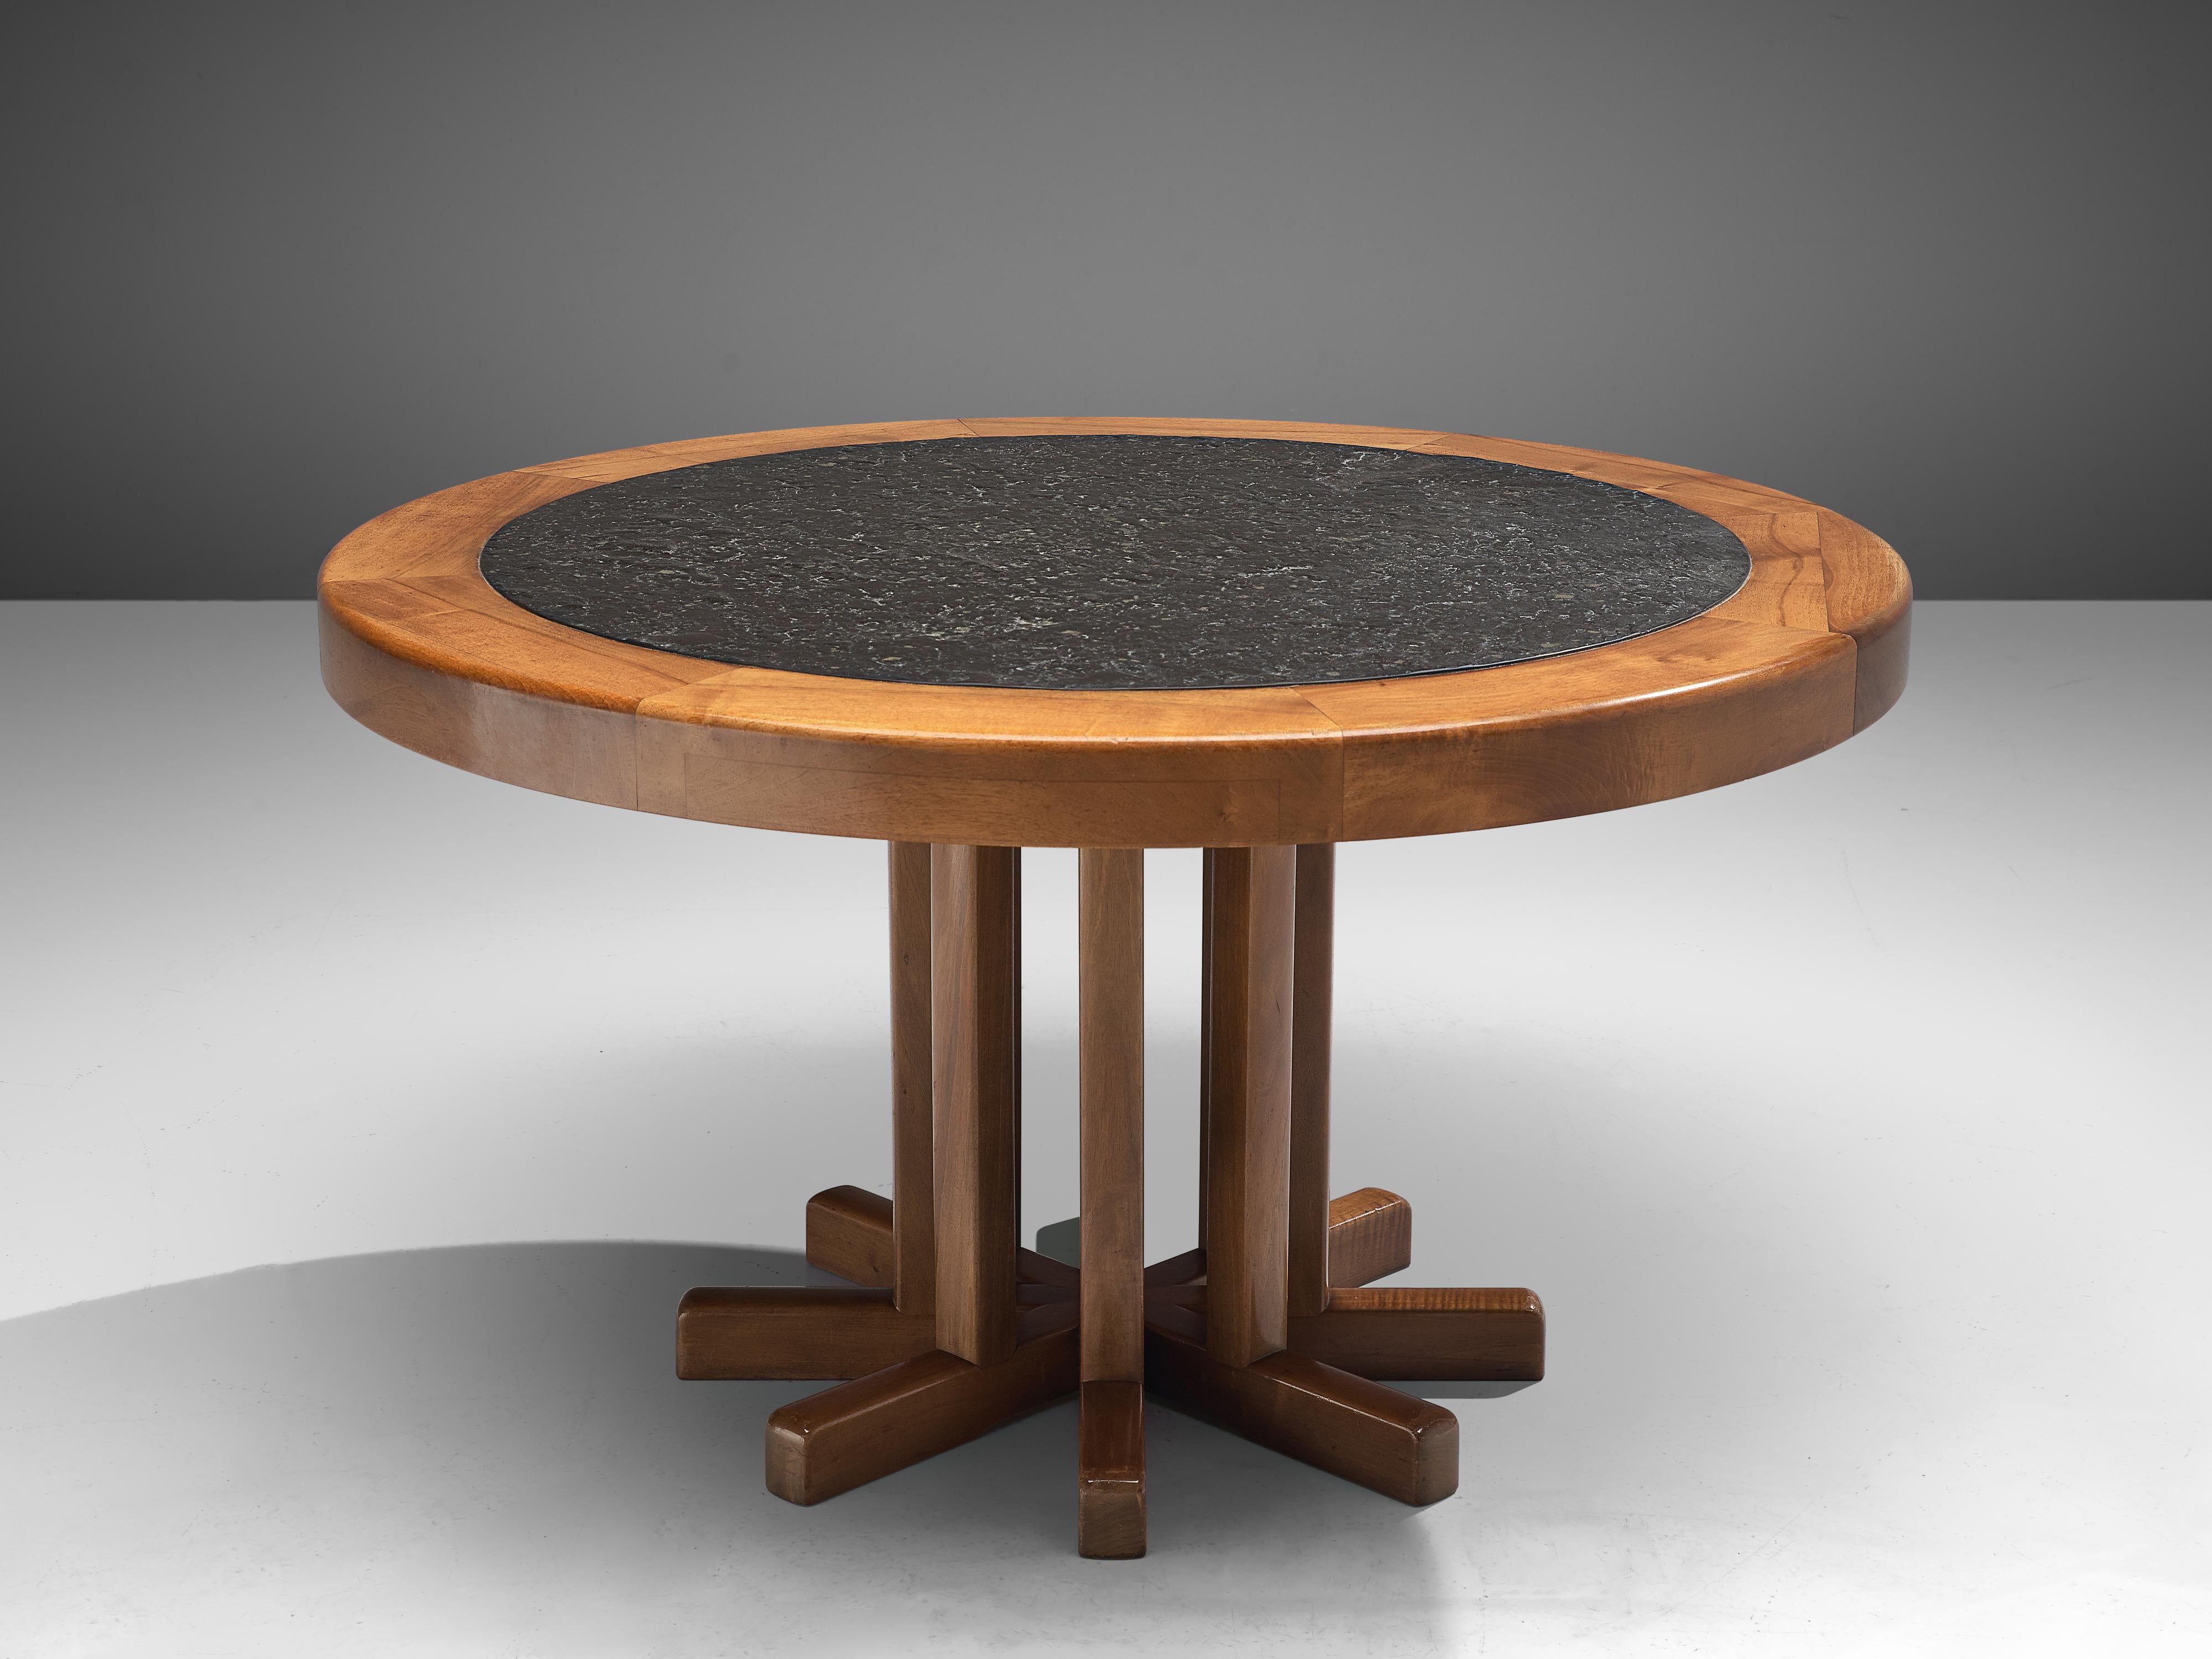 Round dining table, elm, slate, France, 1970s

This French dining table shows a wonderful combination of materials and well-balanced forms. Both the tabletop and the base catch the eye. The pedestal base consists of eight wooden slats arranged in